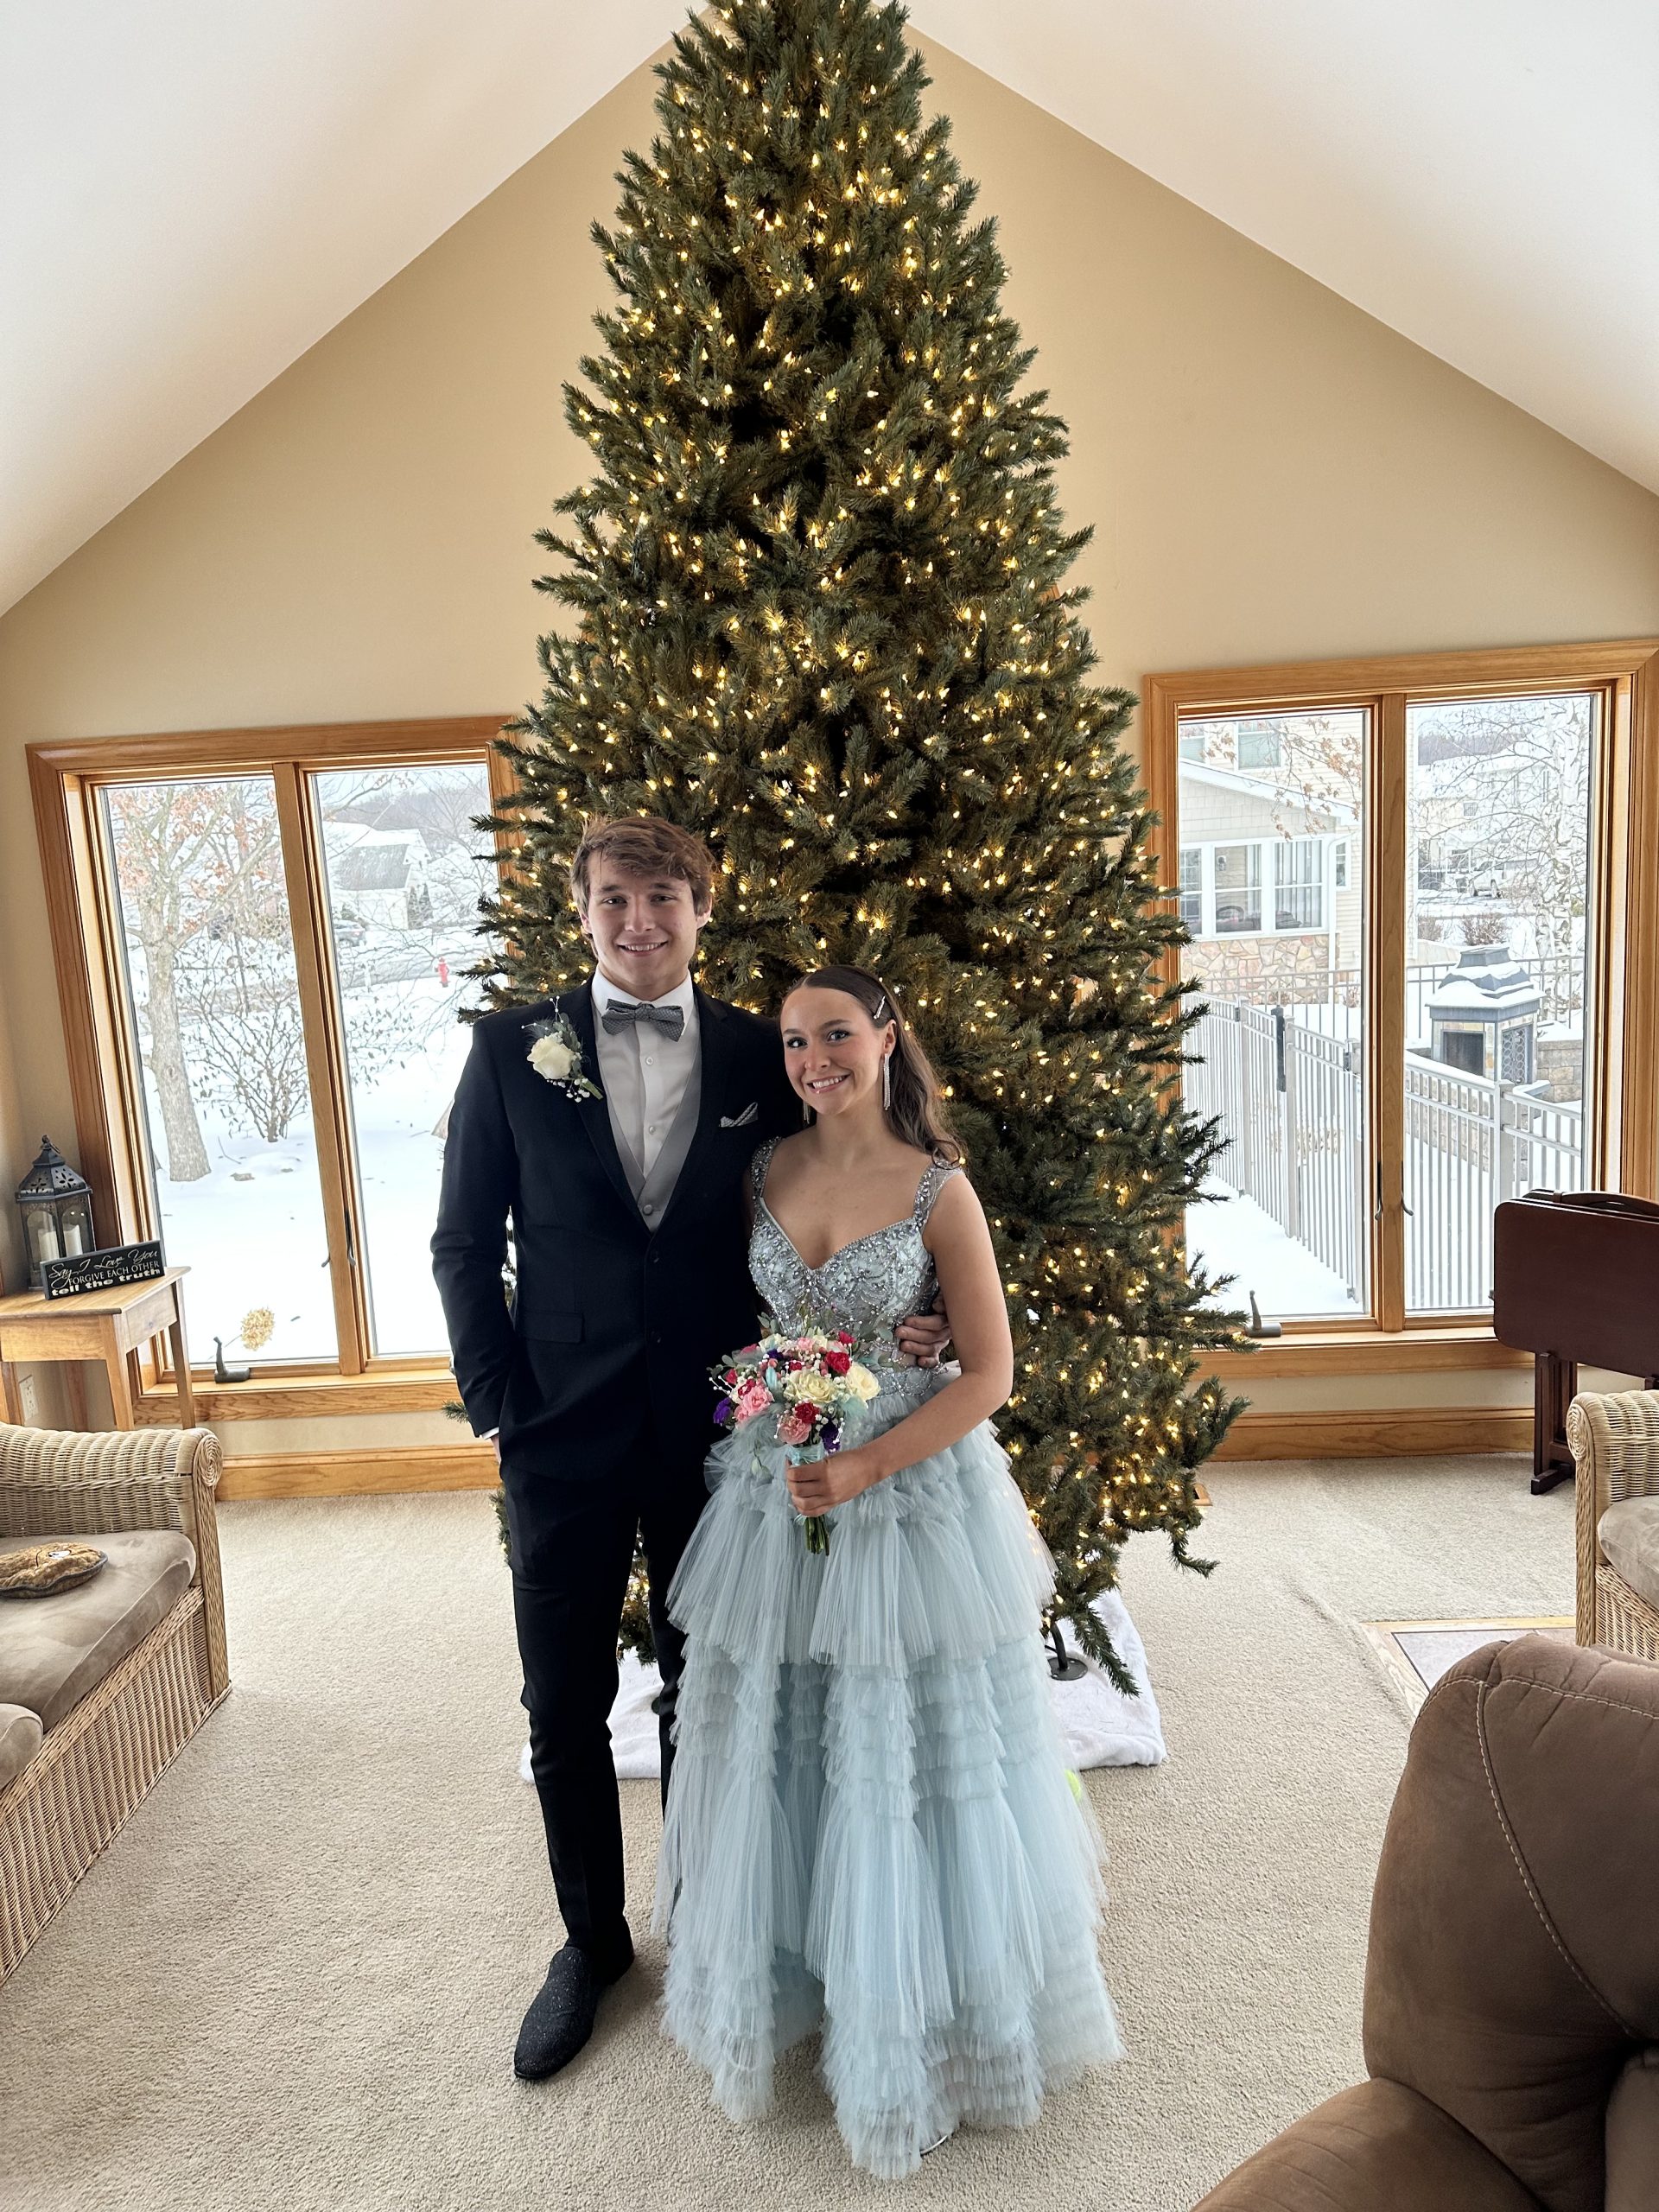 A young couple wearing formalwear standing smiling in front of a Christmas tree